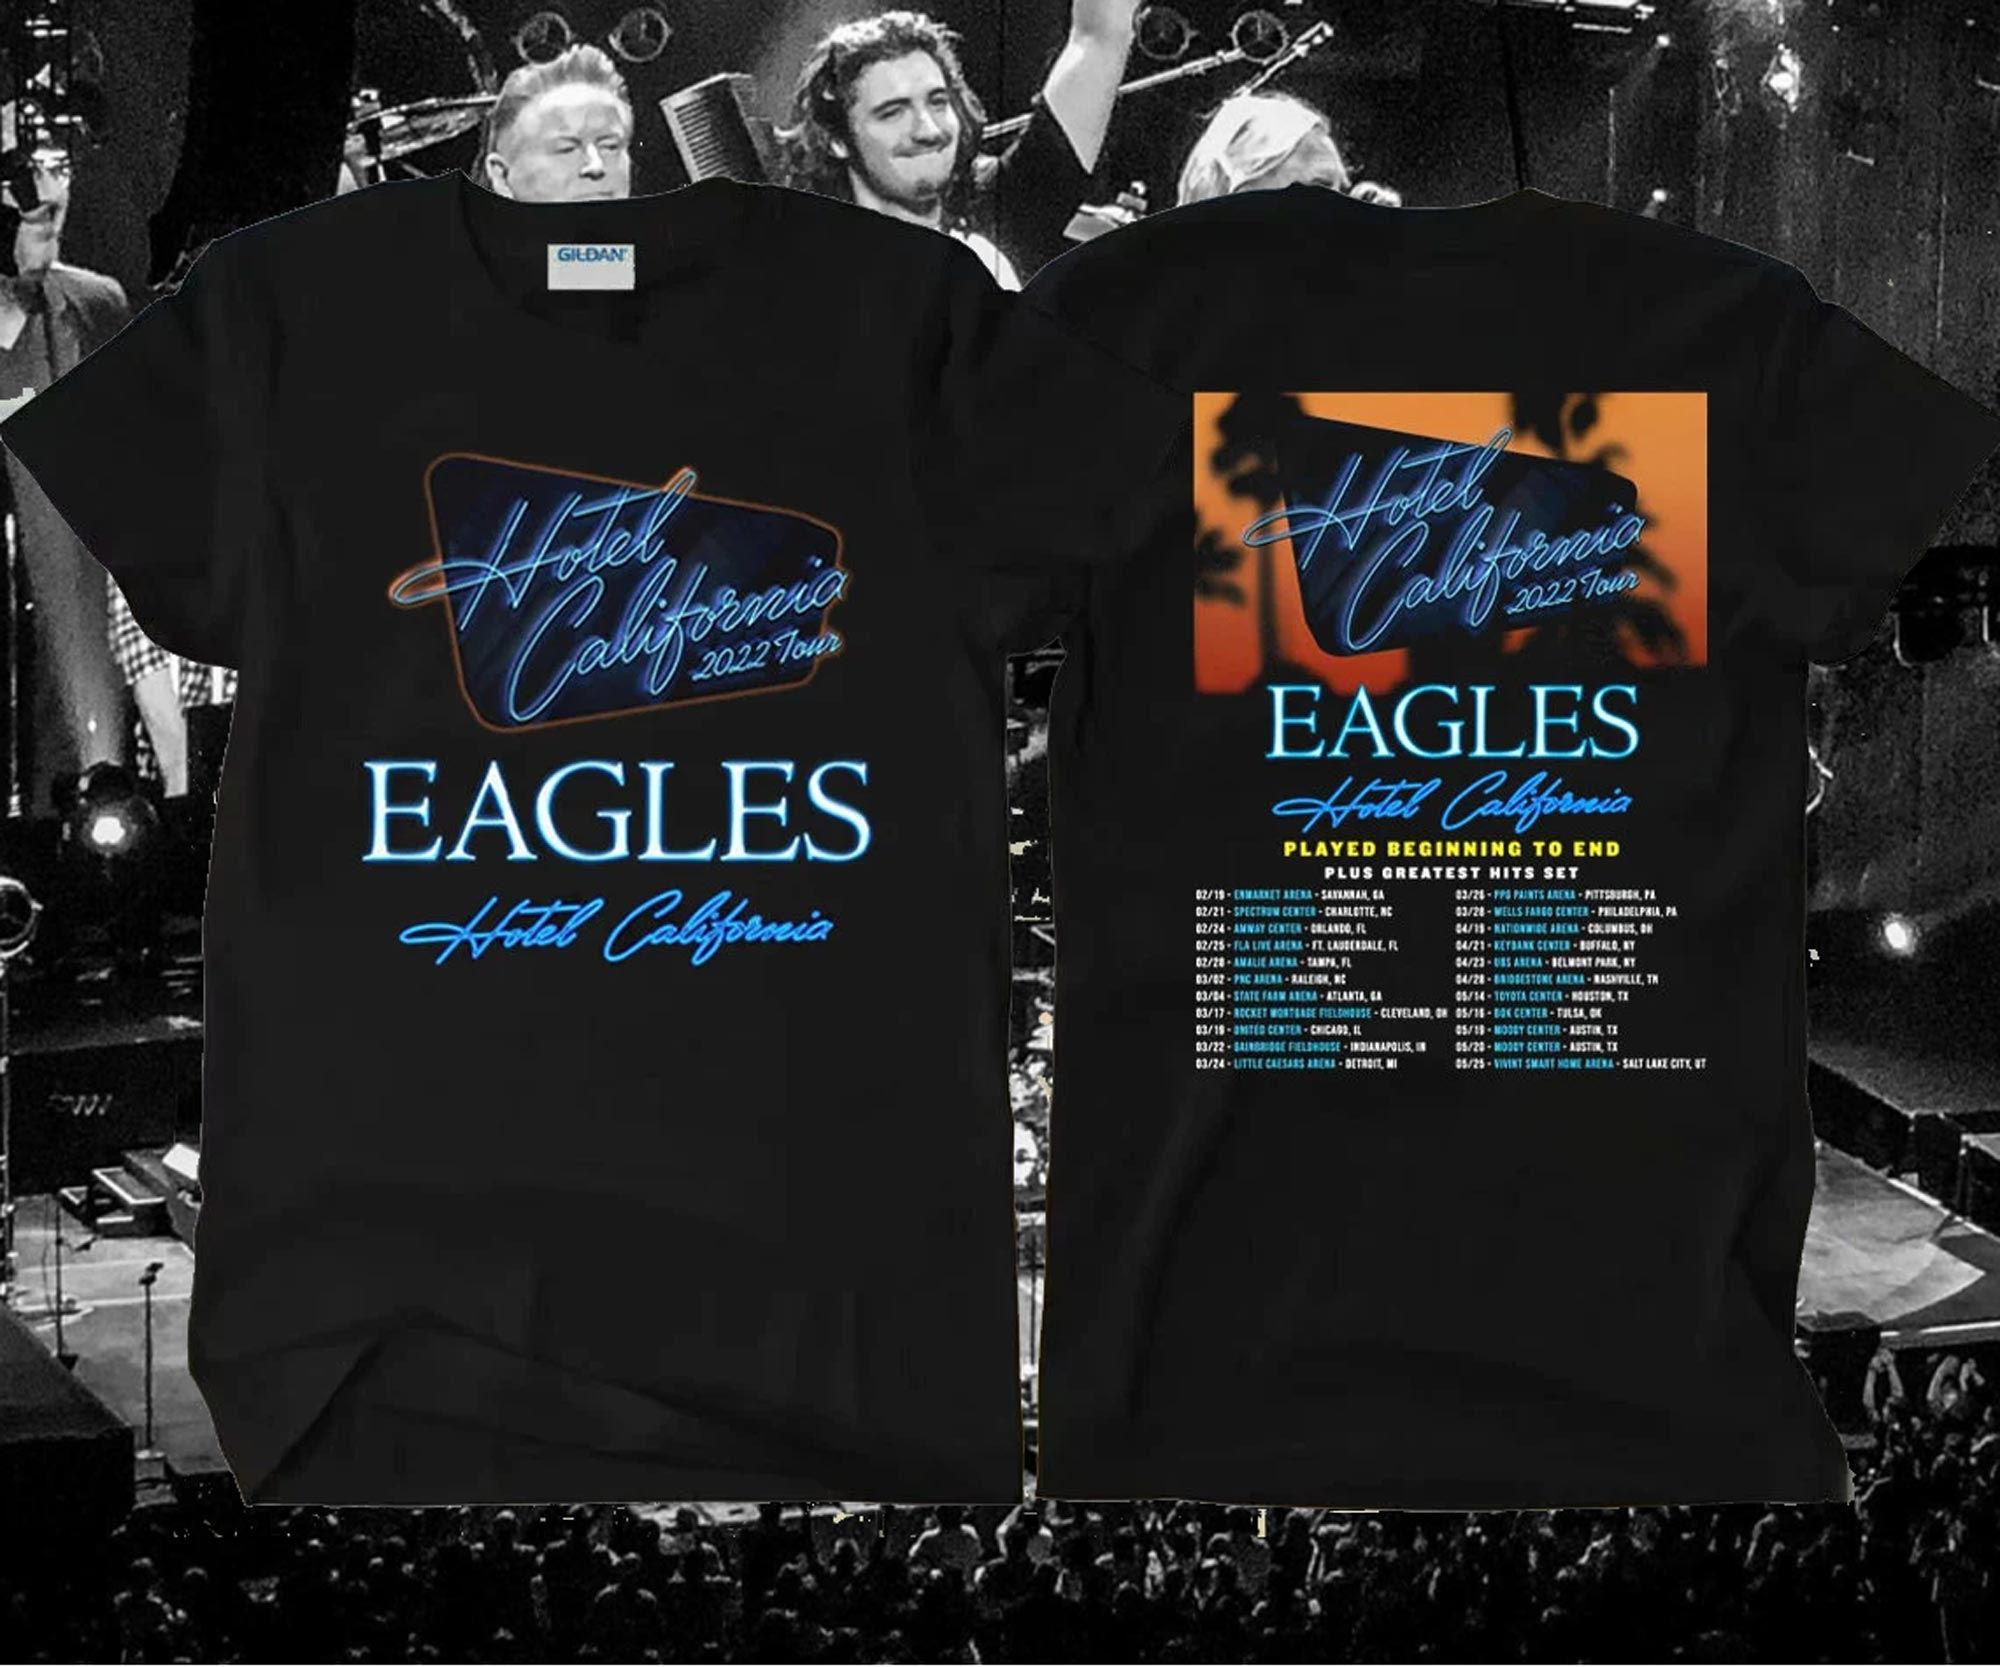 The Eagles Hotel California Concert 2022 Tour T-shirt Plus Size Up To 5xl